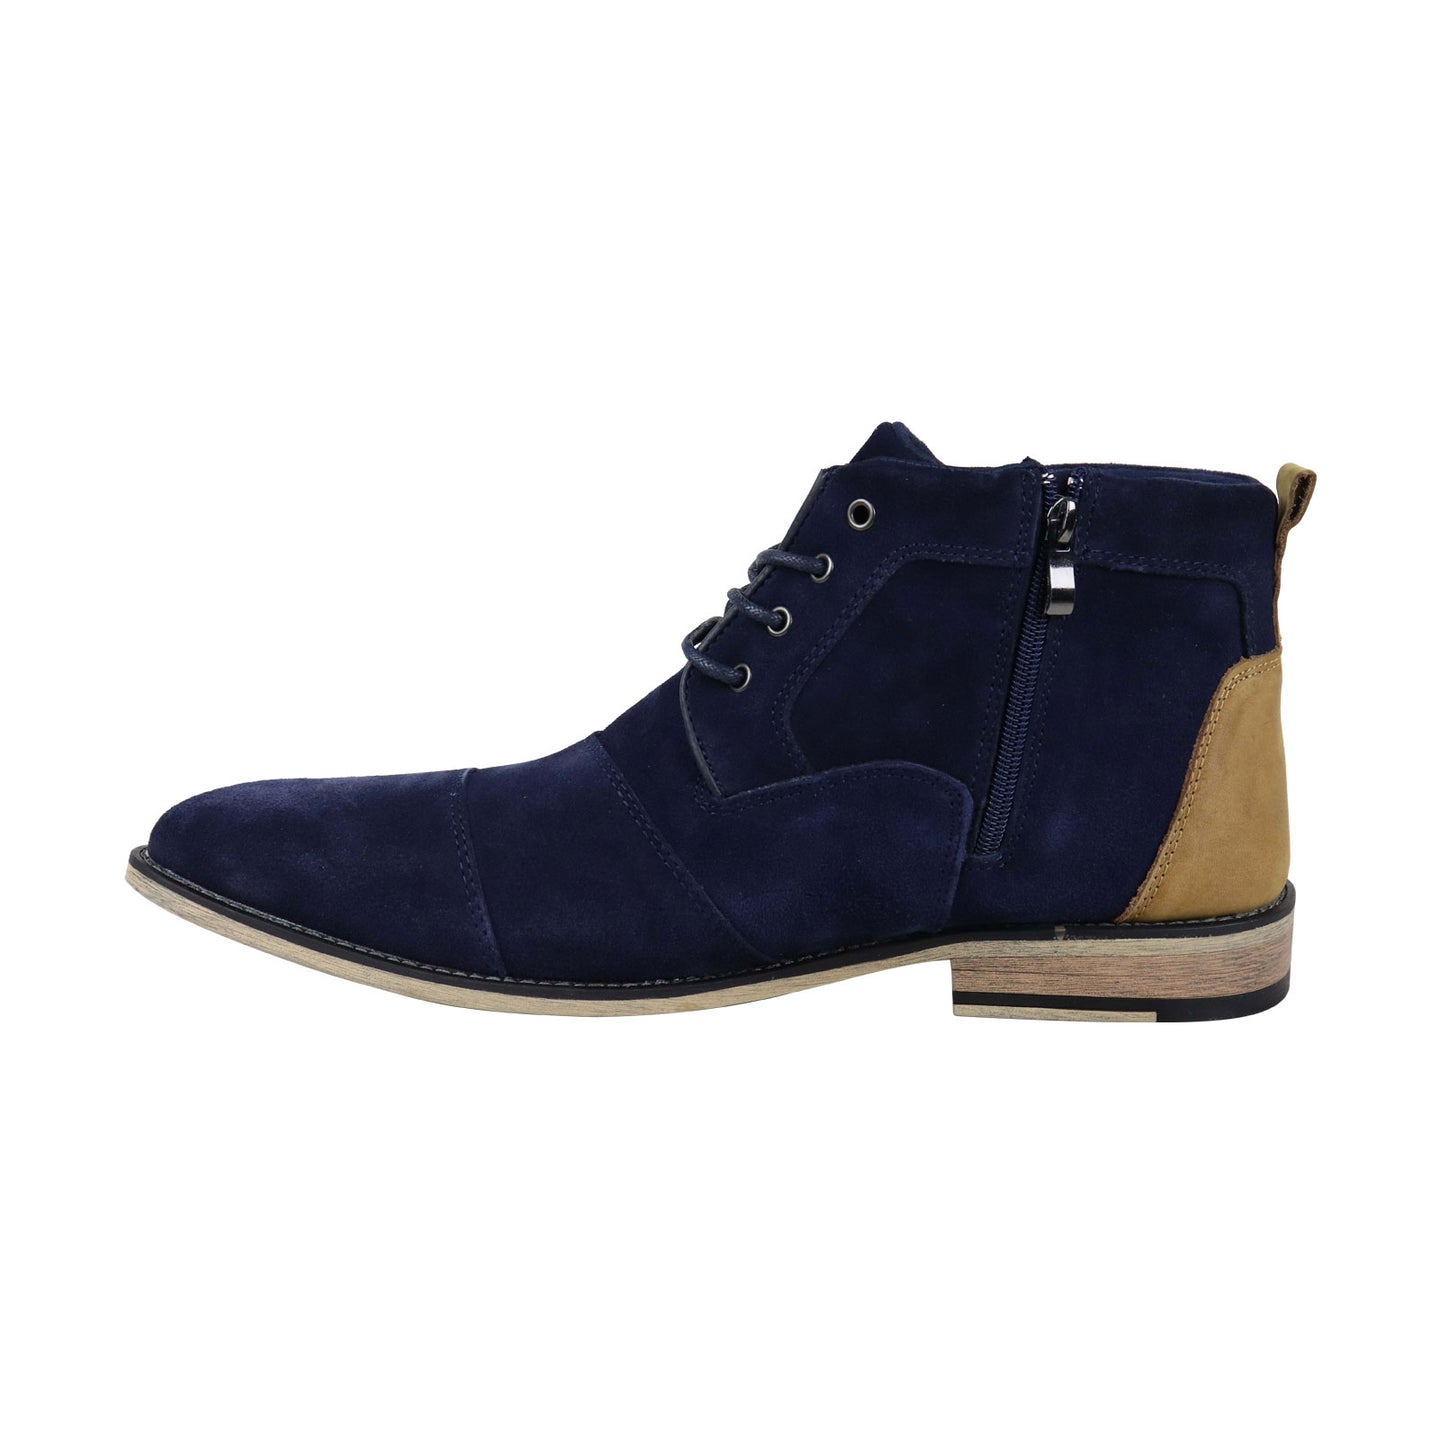 Steve Madden Johnnie Mens Blue Suede Lace Up Casual Dress Boots Shoes ...